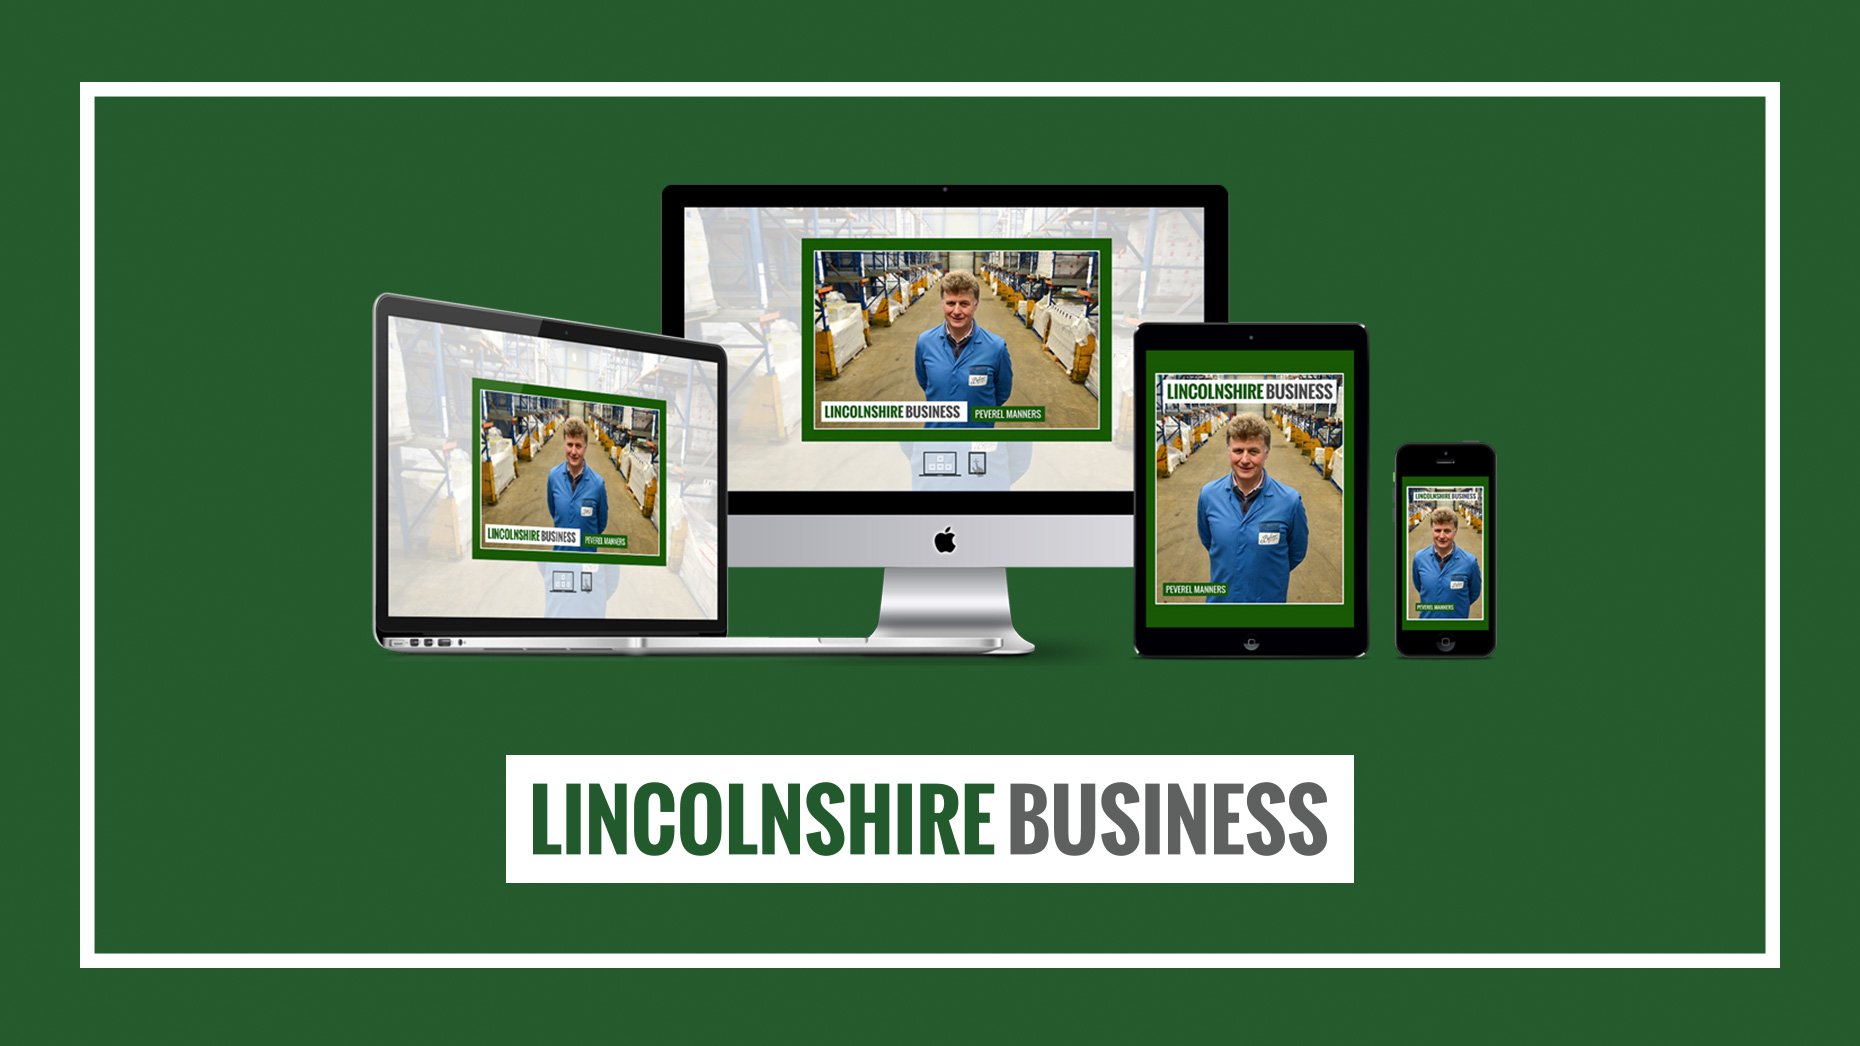 Issue 19 of Lincolnshire business magazine is available to ready at www.lincsbusiness.co